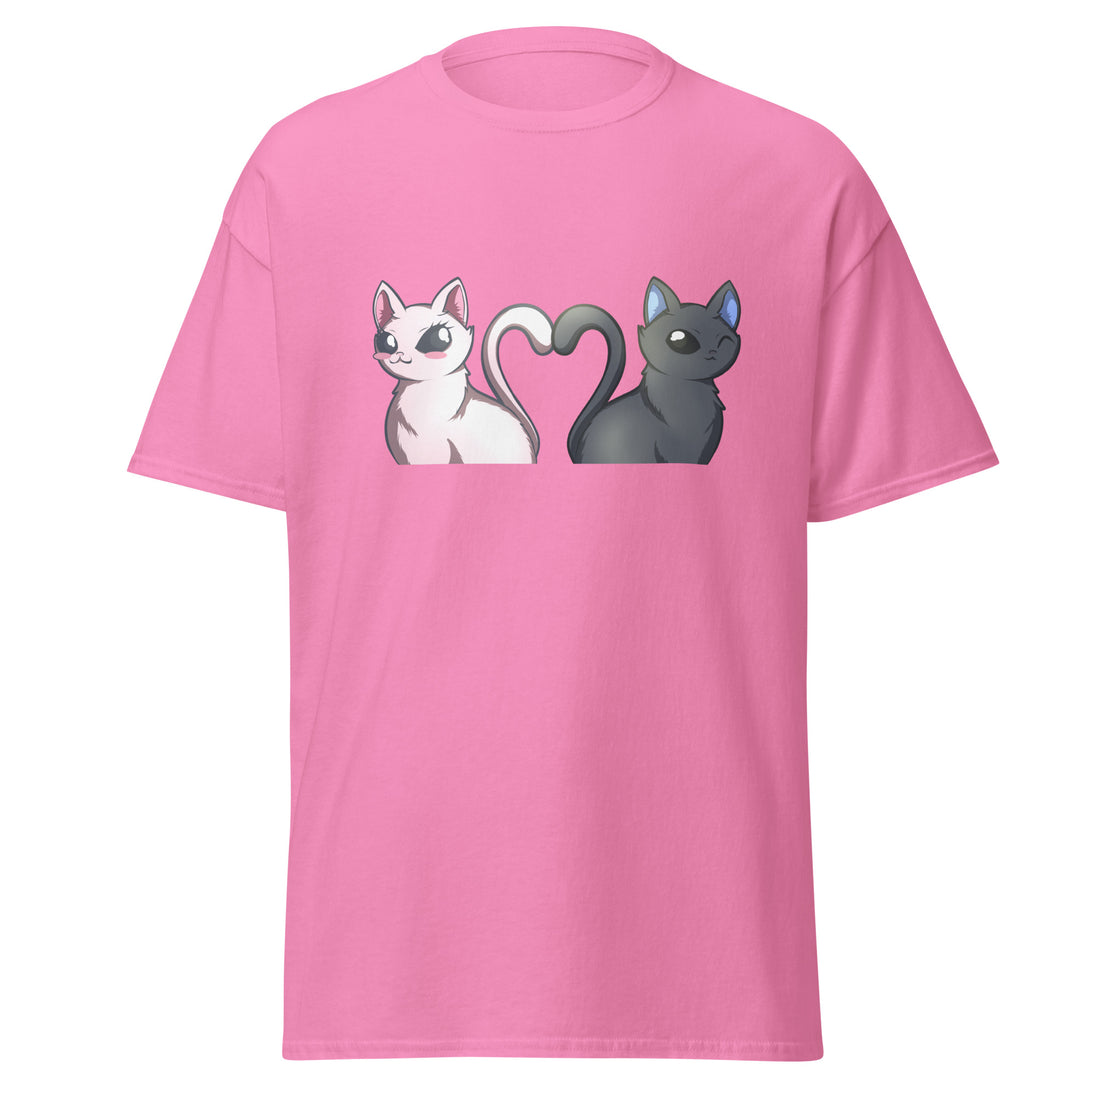 White and Grey Cat Gamer T-Shirt - Soft, Comfortable Made in the USA